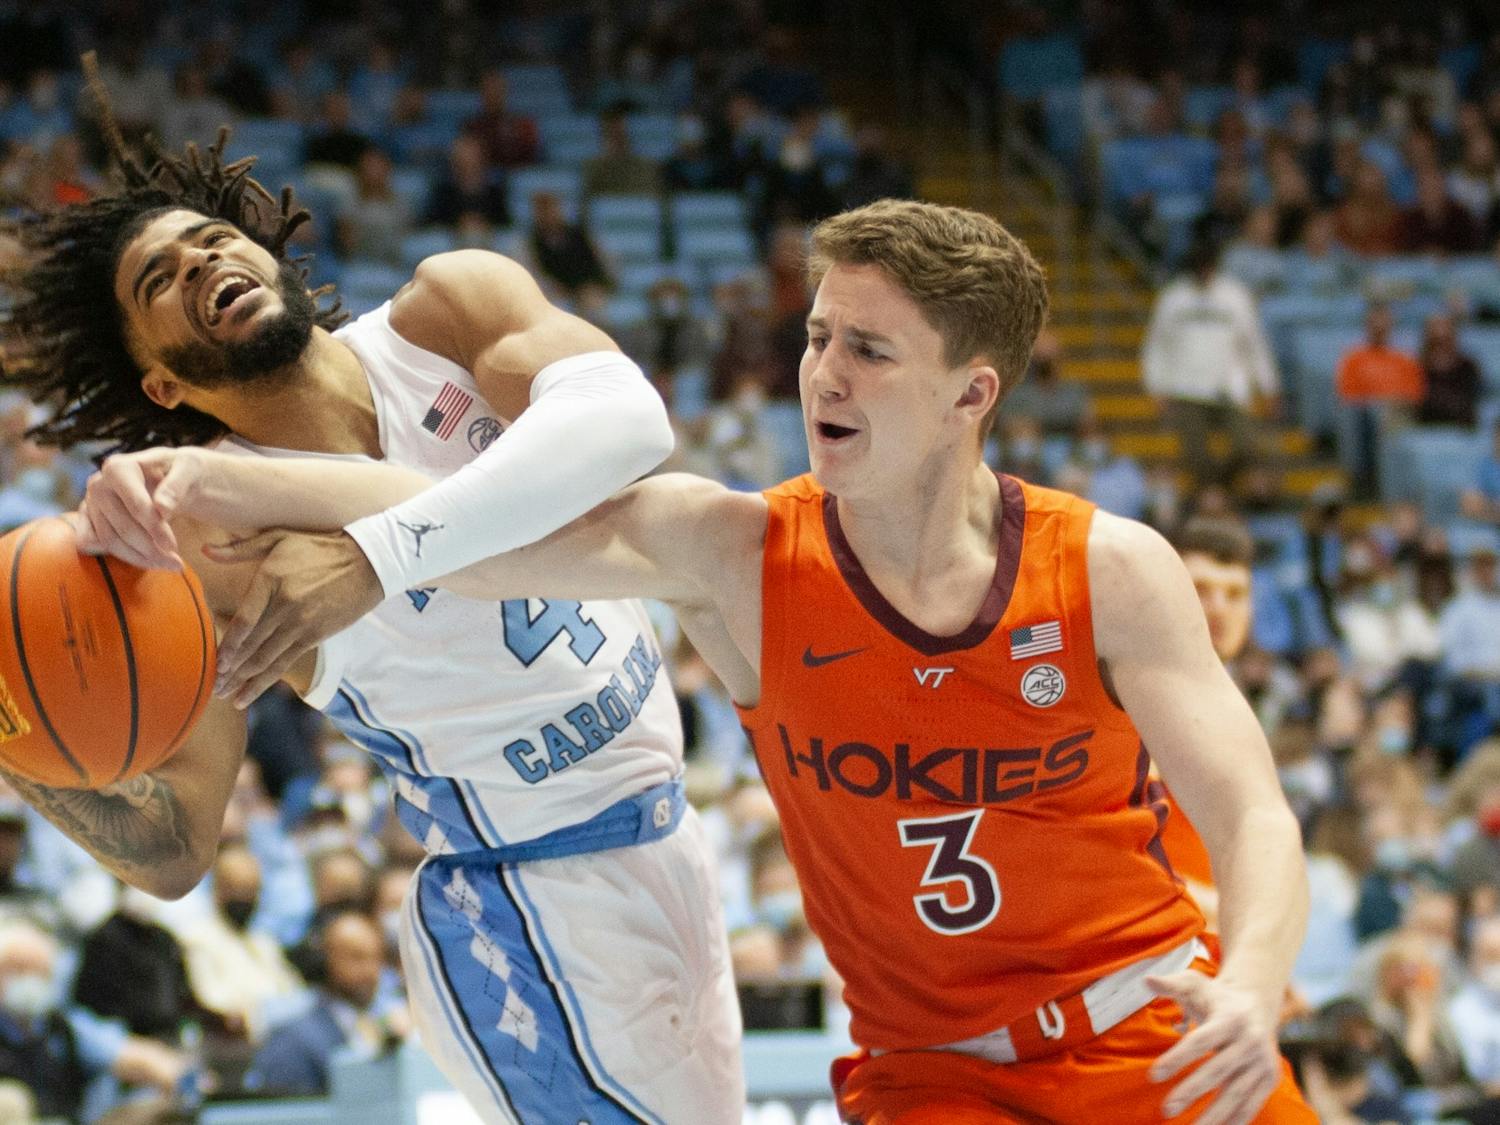 UNC sophomore guard RJ Davis goes for the rebound during UNC Men's basketball's home game against Virginia Tech on Monday, Jan. 24, 2022, at the Dean Smith Center.